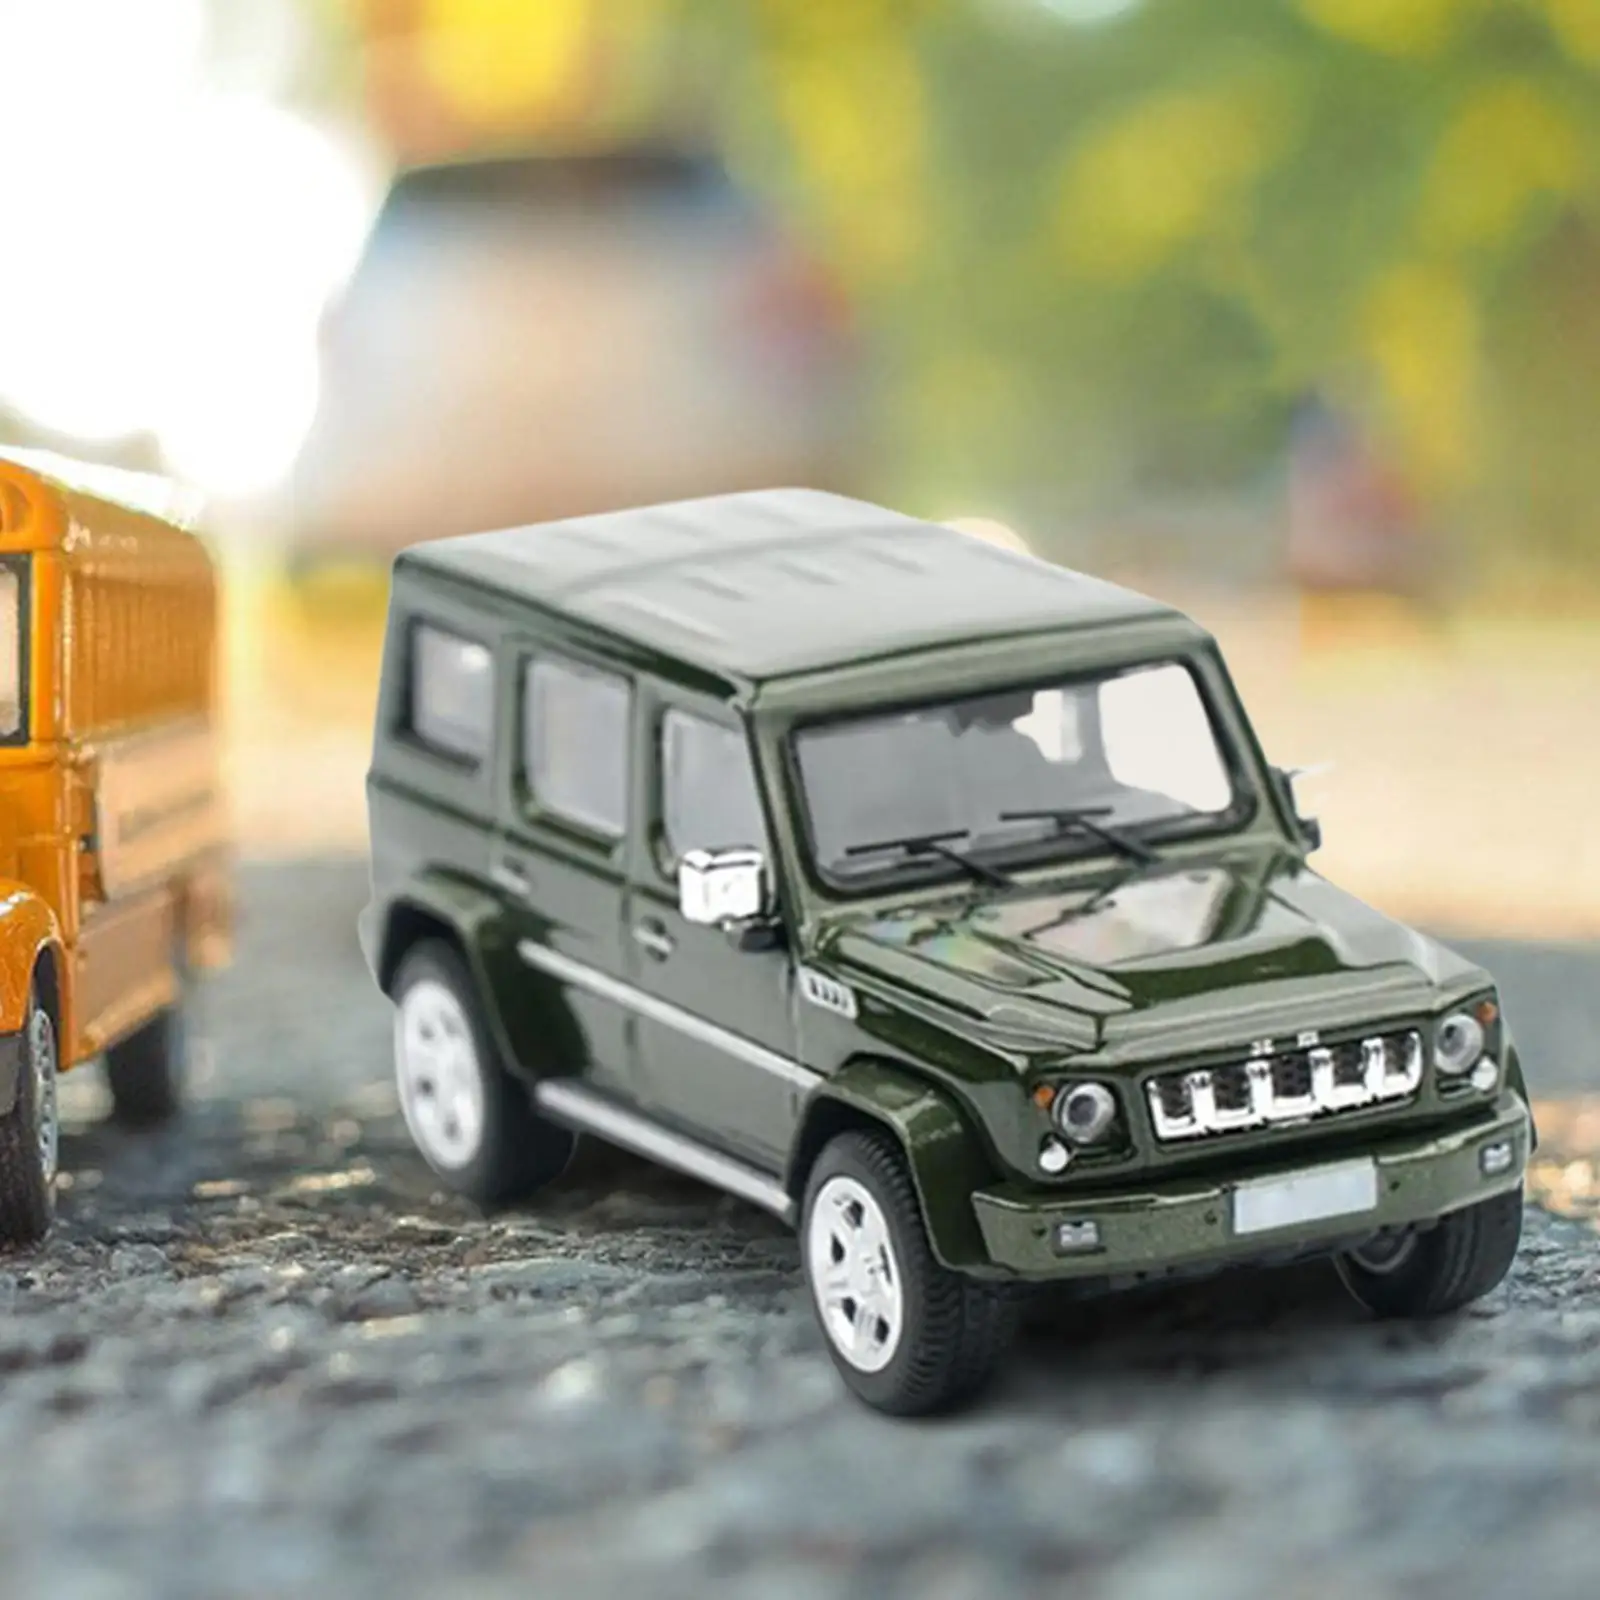 1/64 Diecast Model Car Diorama Scenes Diecast Toys Collection for Scenery Landscape